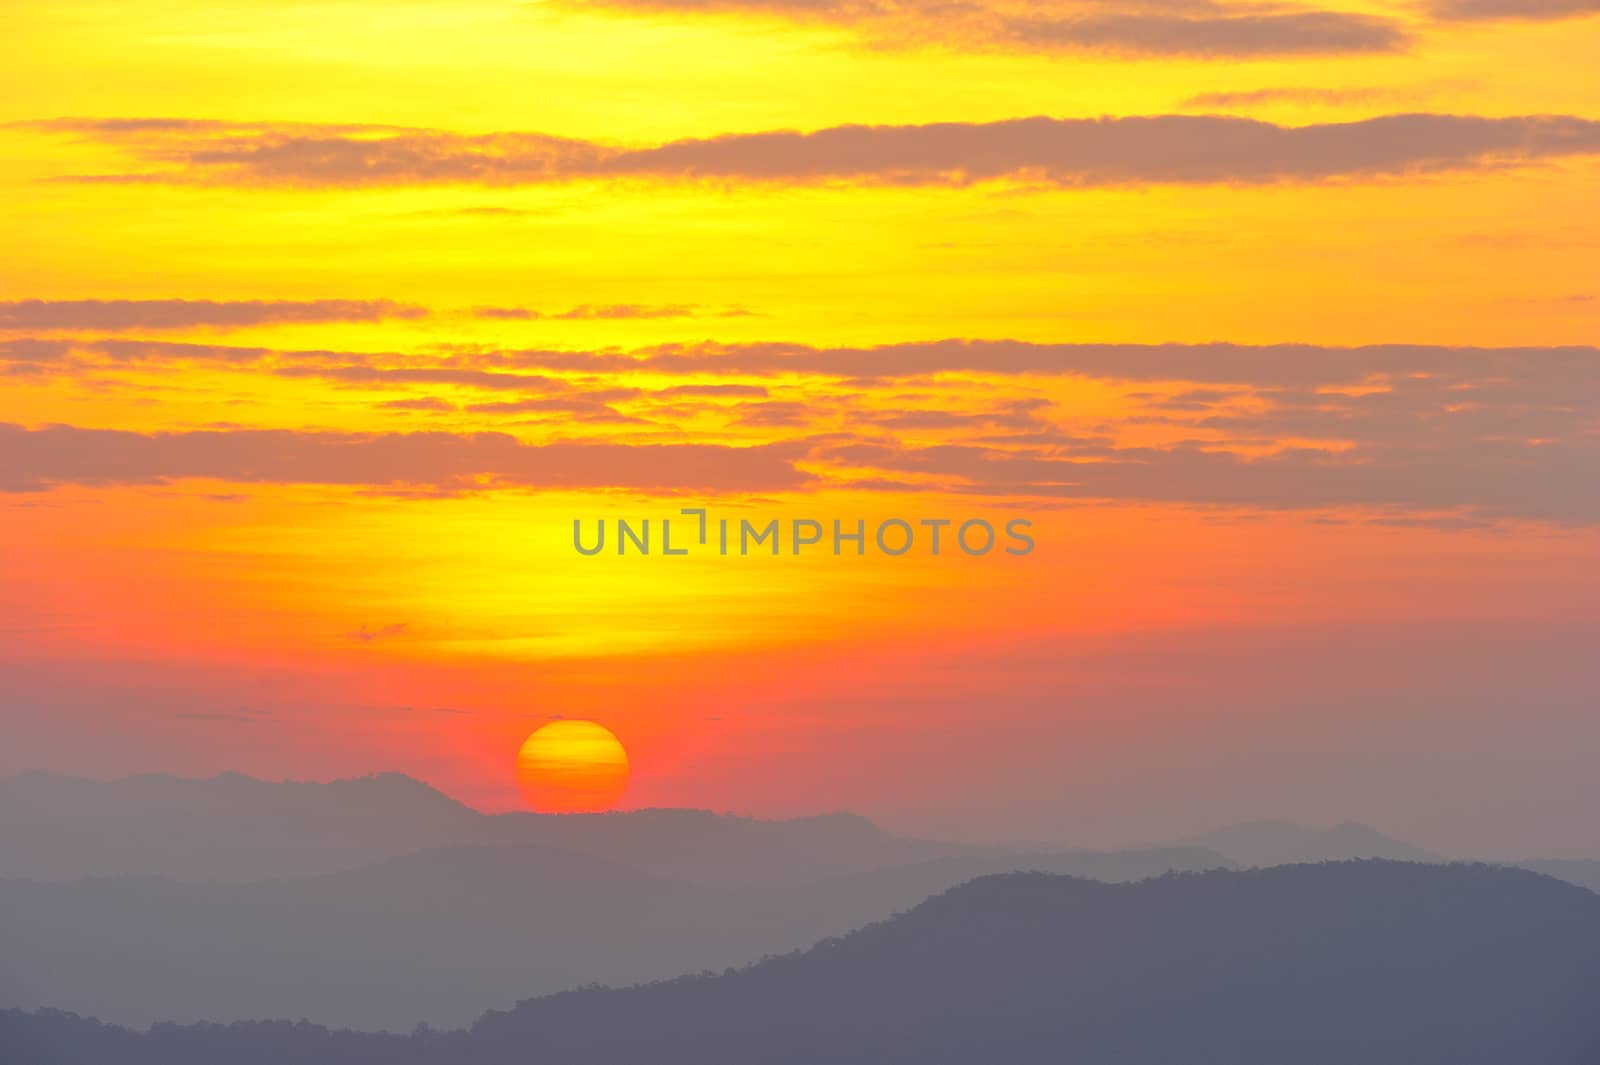 sunrise at Nan province,North of thailand by think4photop